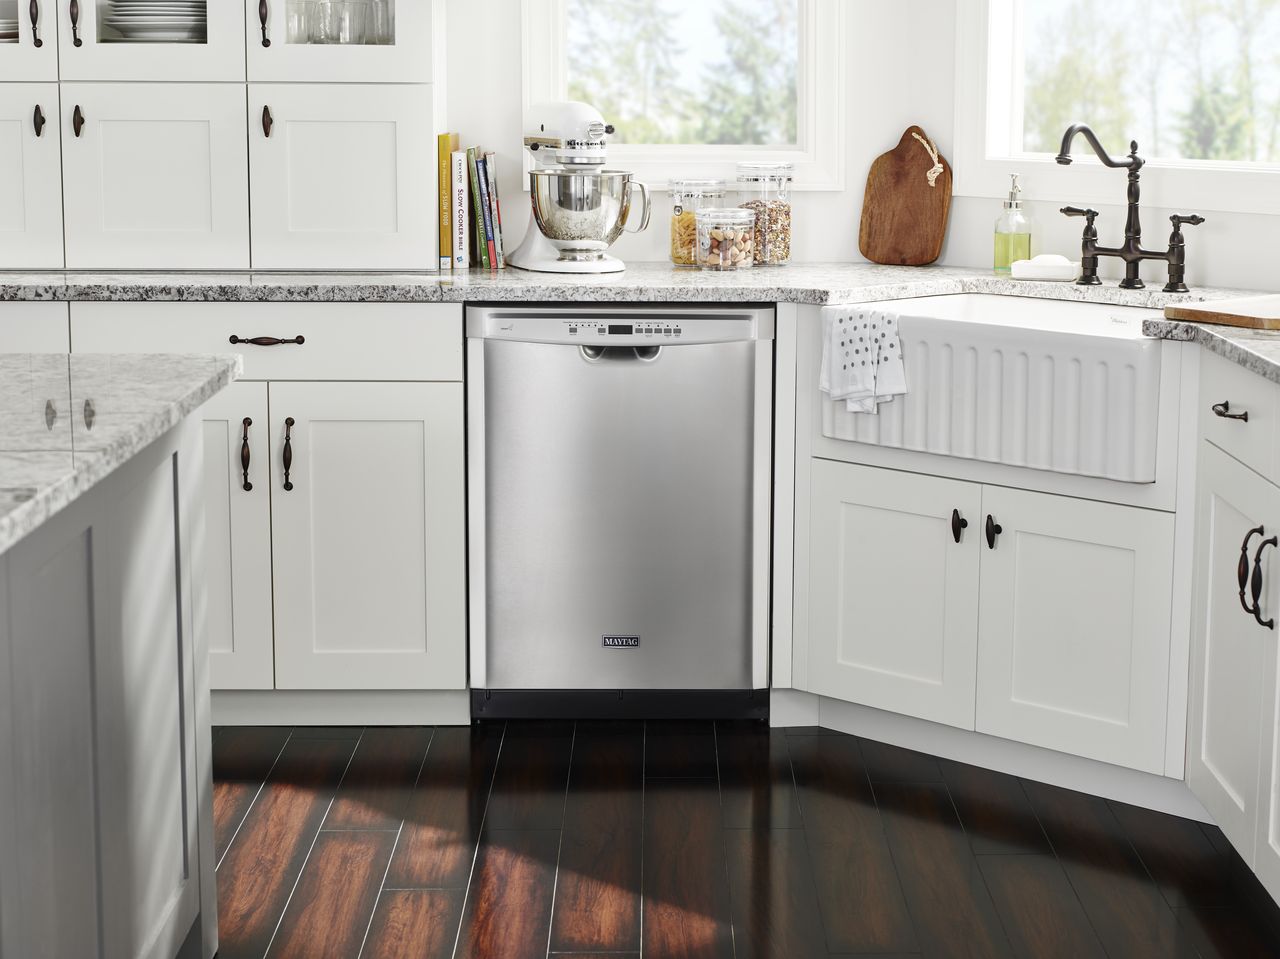 How to Replace Your Maytag Dishwasher's Insulation - Appliance Express